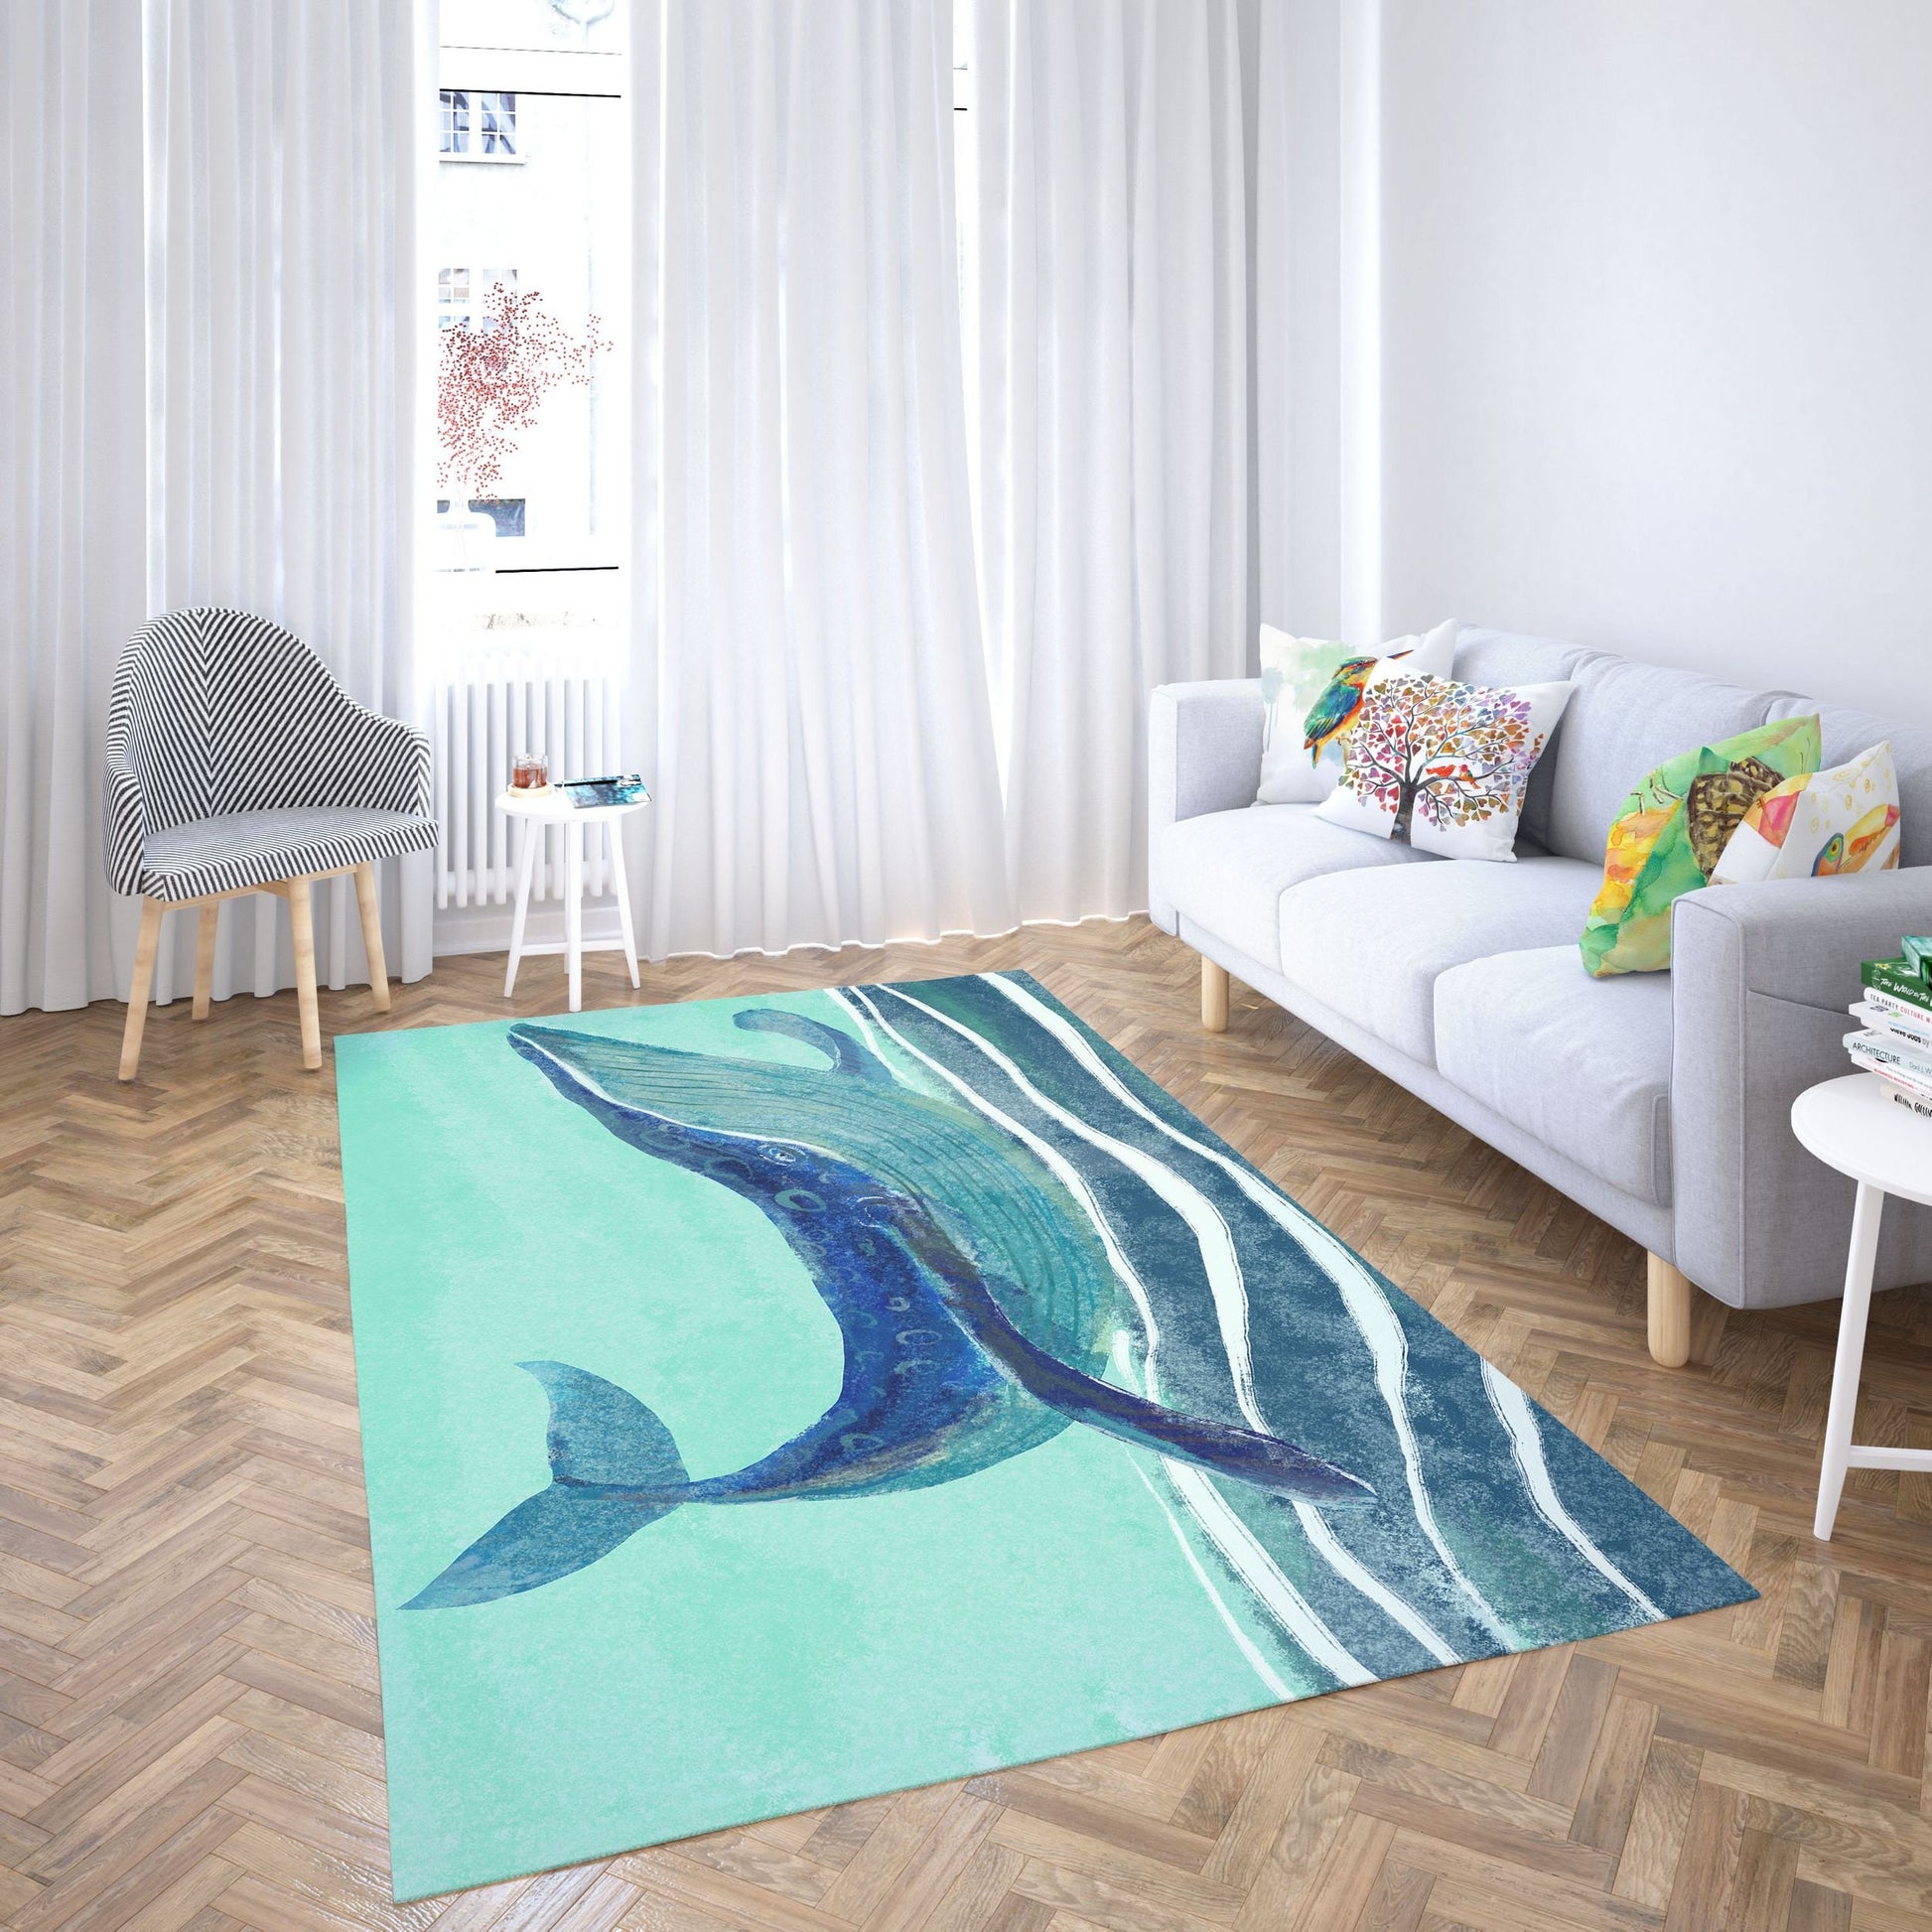 Kids Area Rug, Thick Carpet, Rectangle Area Rug, Blue Area Rug, Blue Whale, Stylish Carpet, Floor Rugs, Made In Usa, Flat Woven Rug